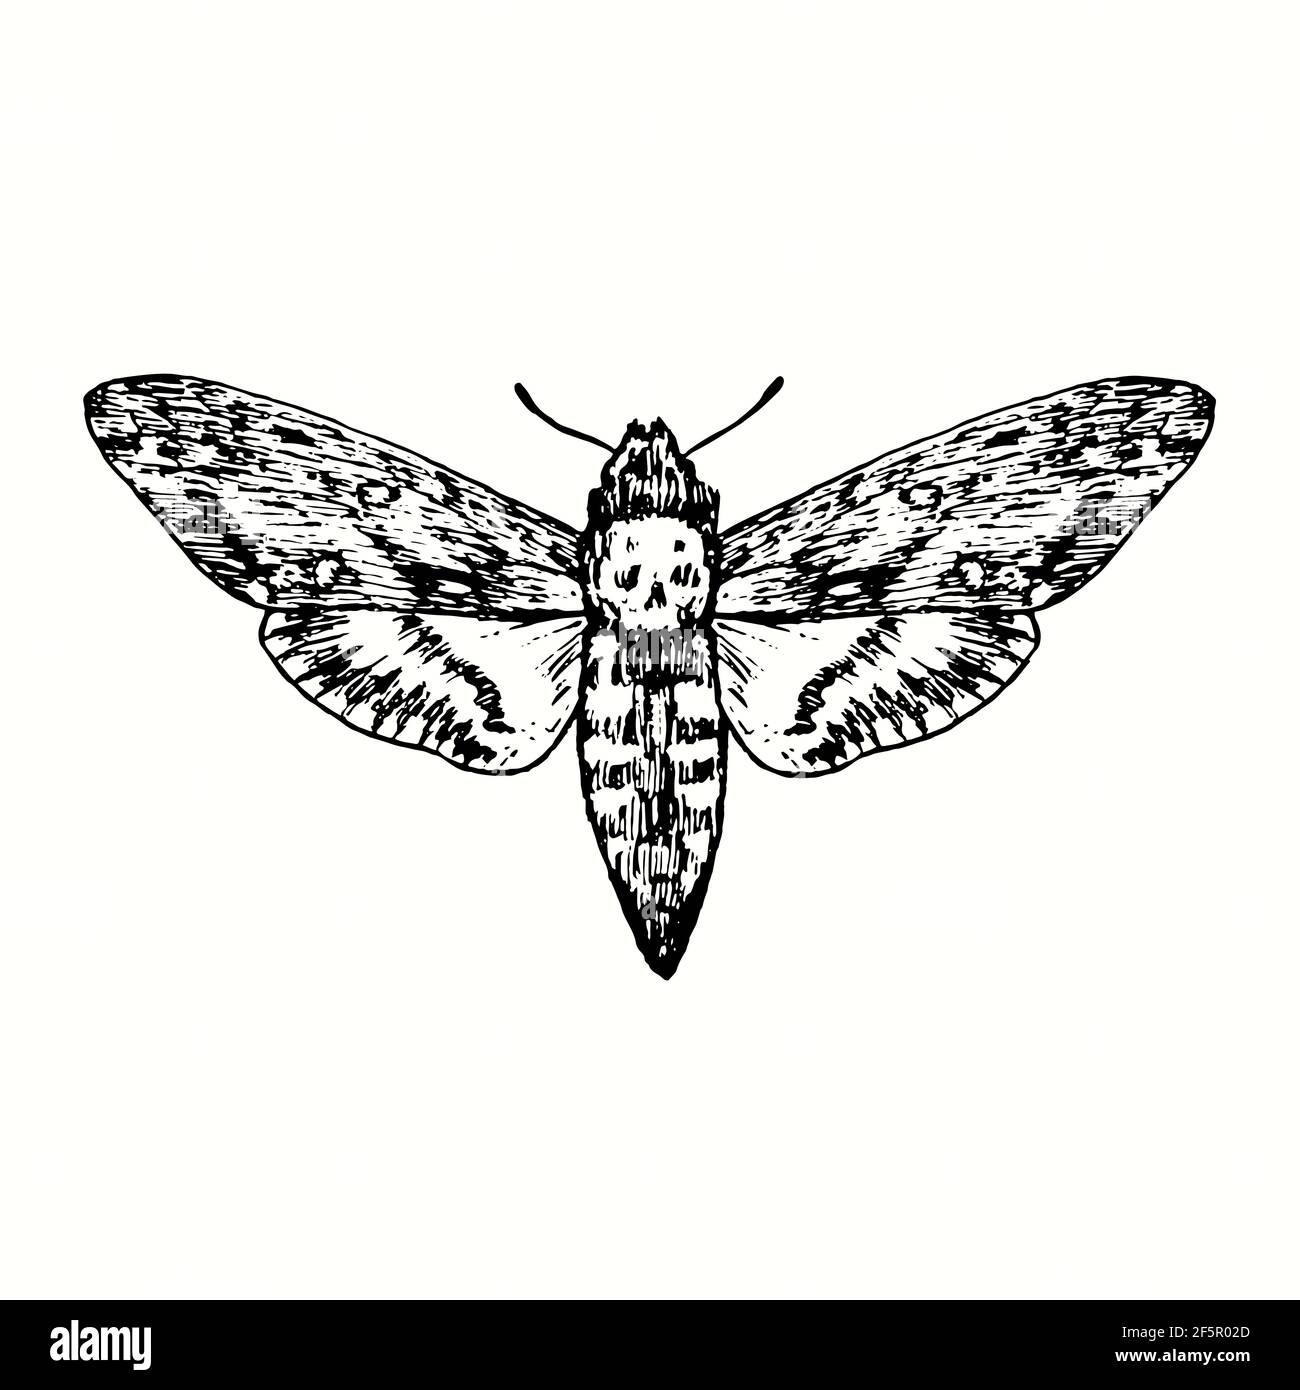 The death's-head hawkmoth (Acherontia atropos, Acherontia styx, Acherontia lachesis) front view. Ink black and white doodle drawing in woodcut style. Stock Photo